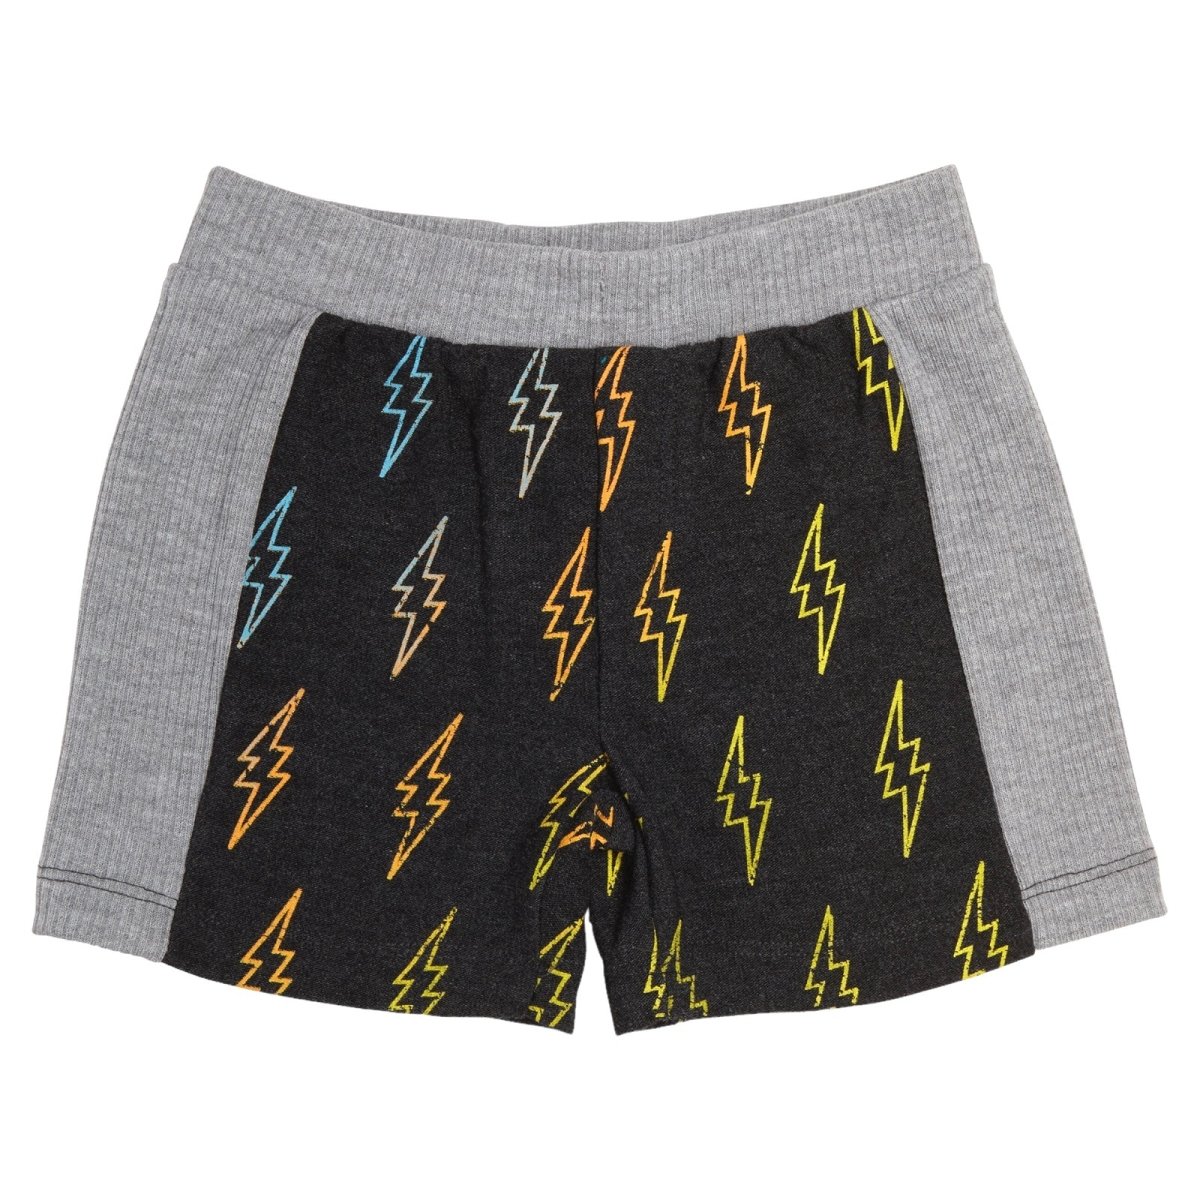 GRADIENT BOLTS SHORTS - CHASER KIDS